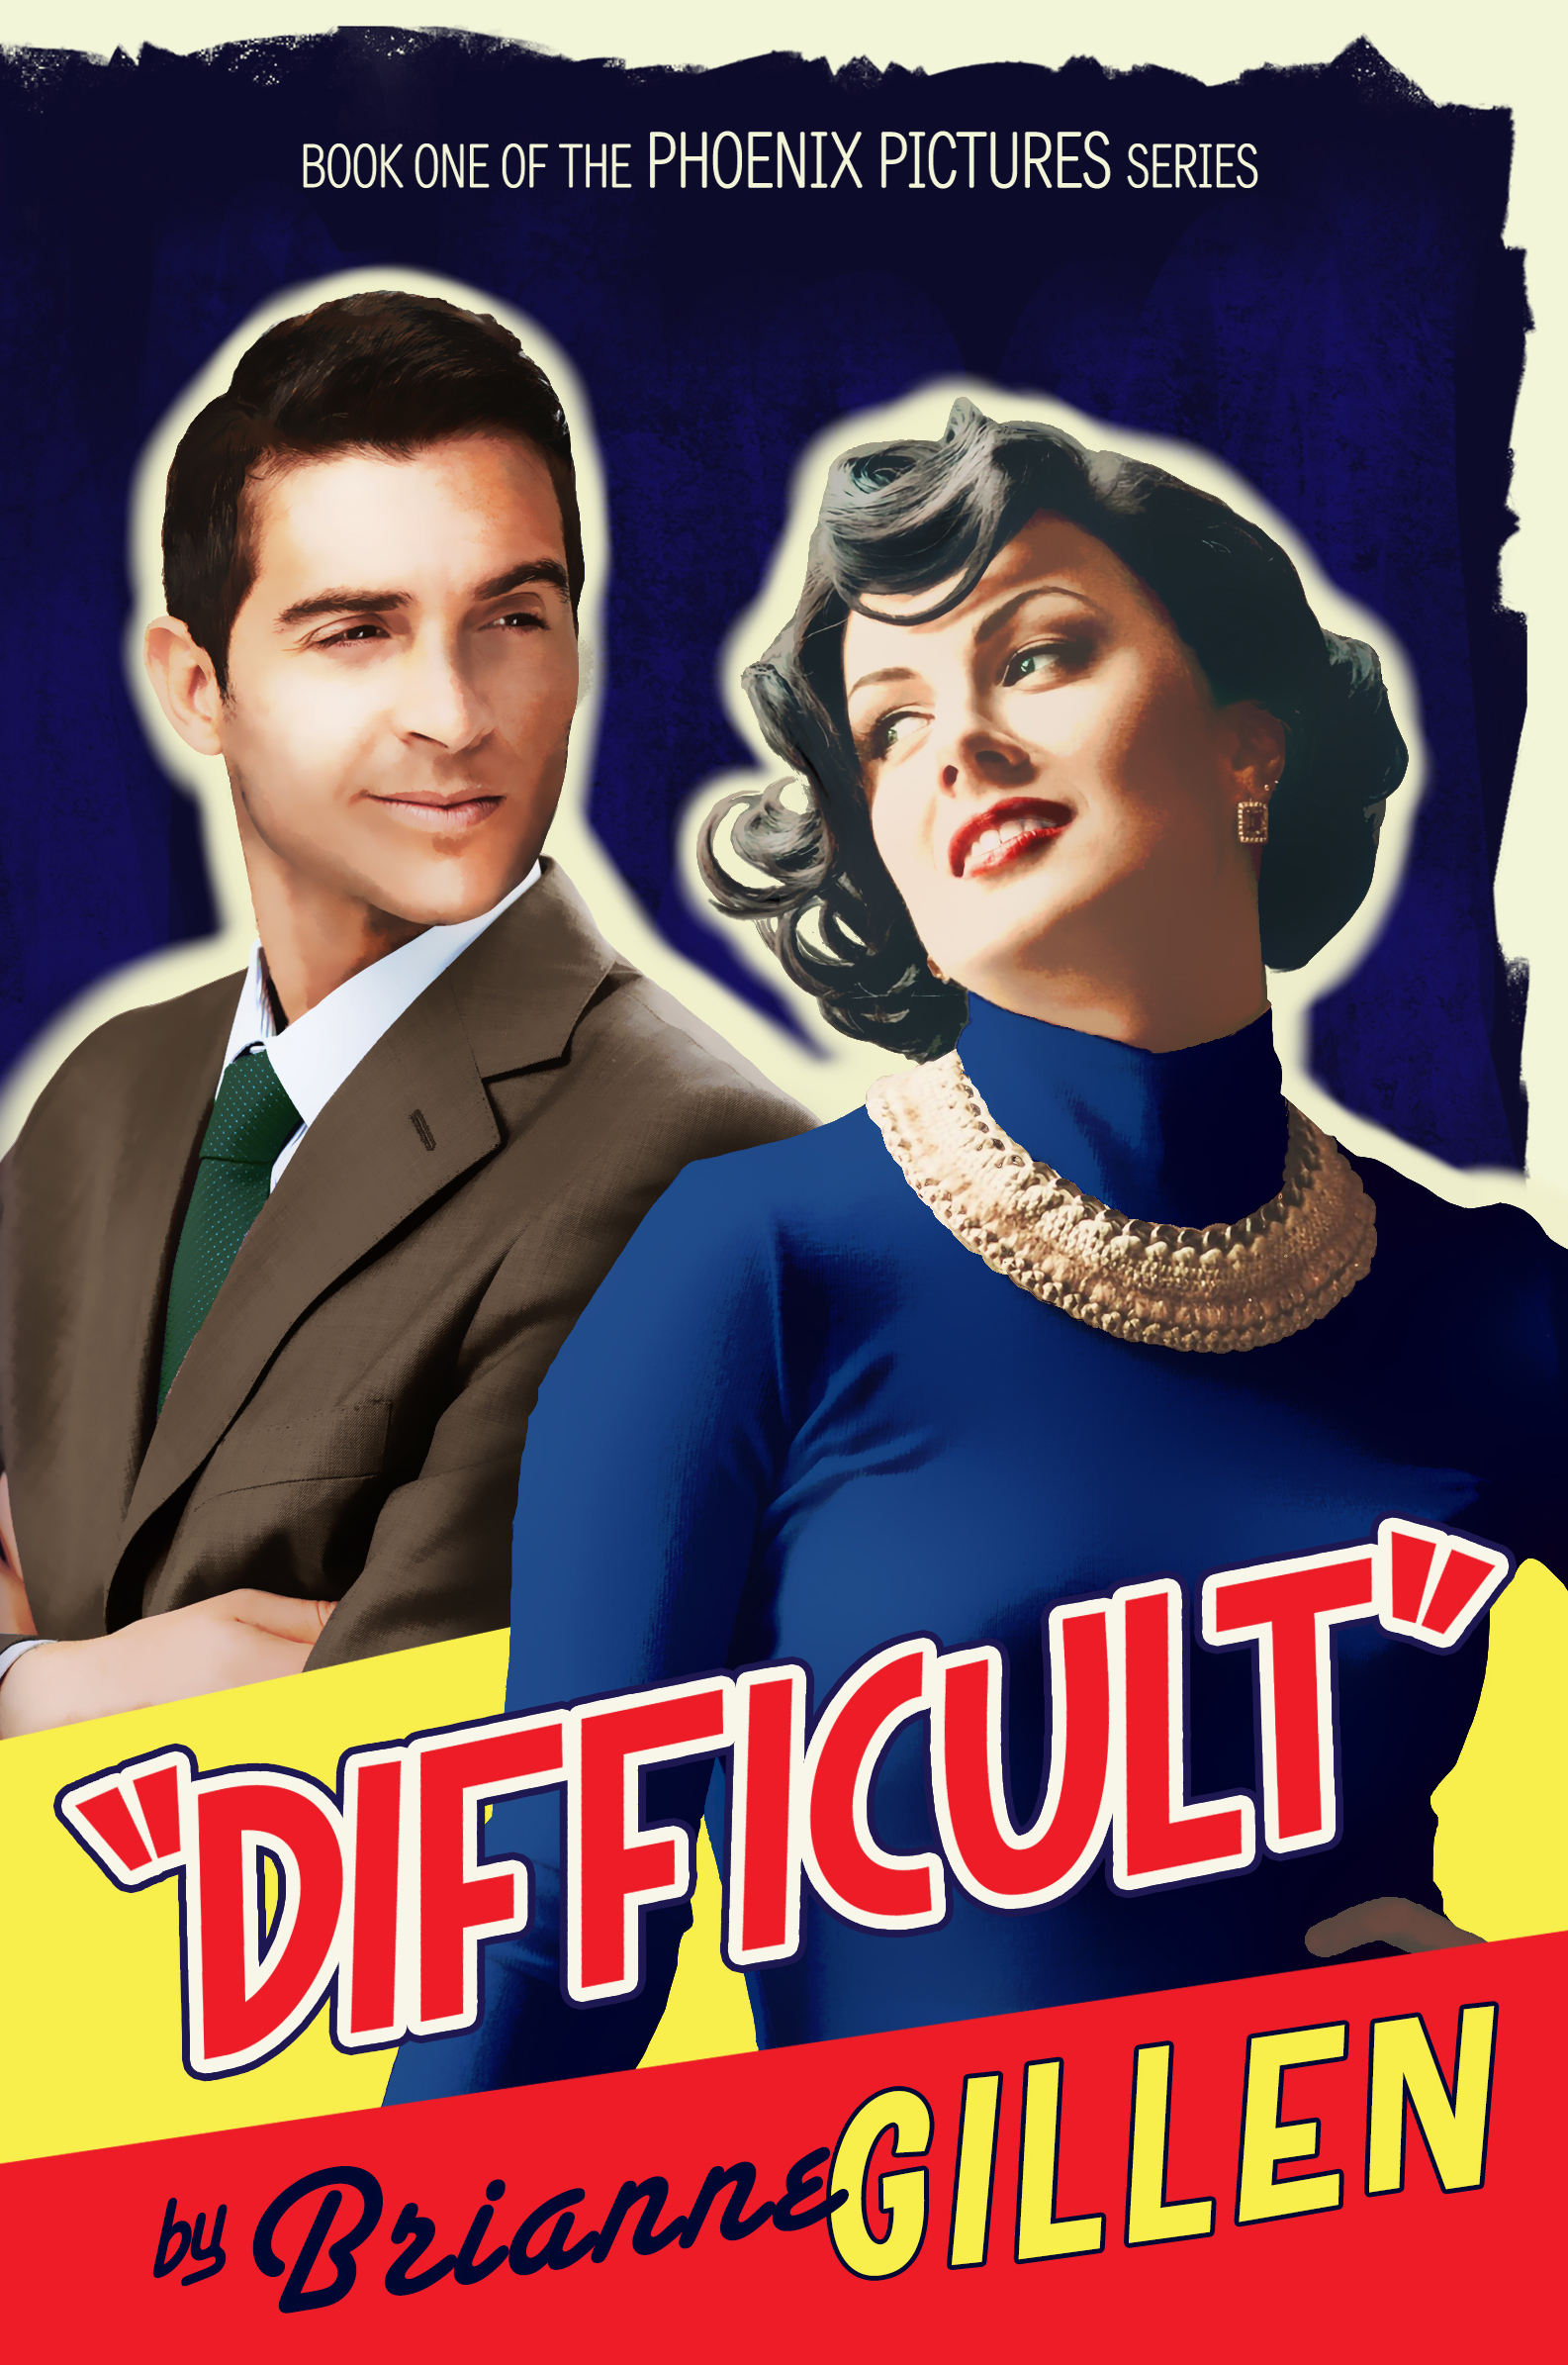 Image of the book cover for Difficult by Brianne Gillen. A classic film poster-inspired image of a dark-haired woman smiling over her shoulder at a brown-haired man smiling cheekily at her, against a blue, red, and yellow background.